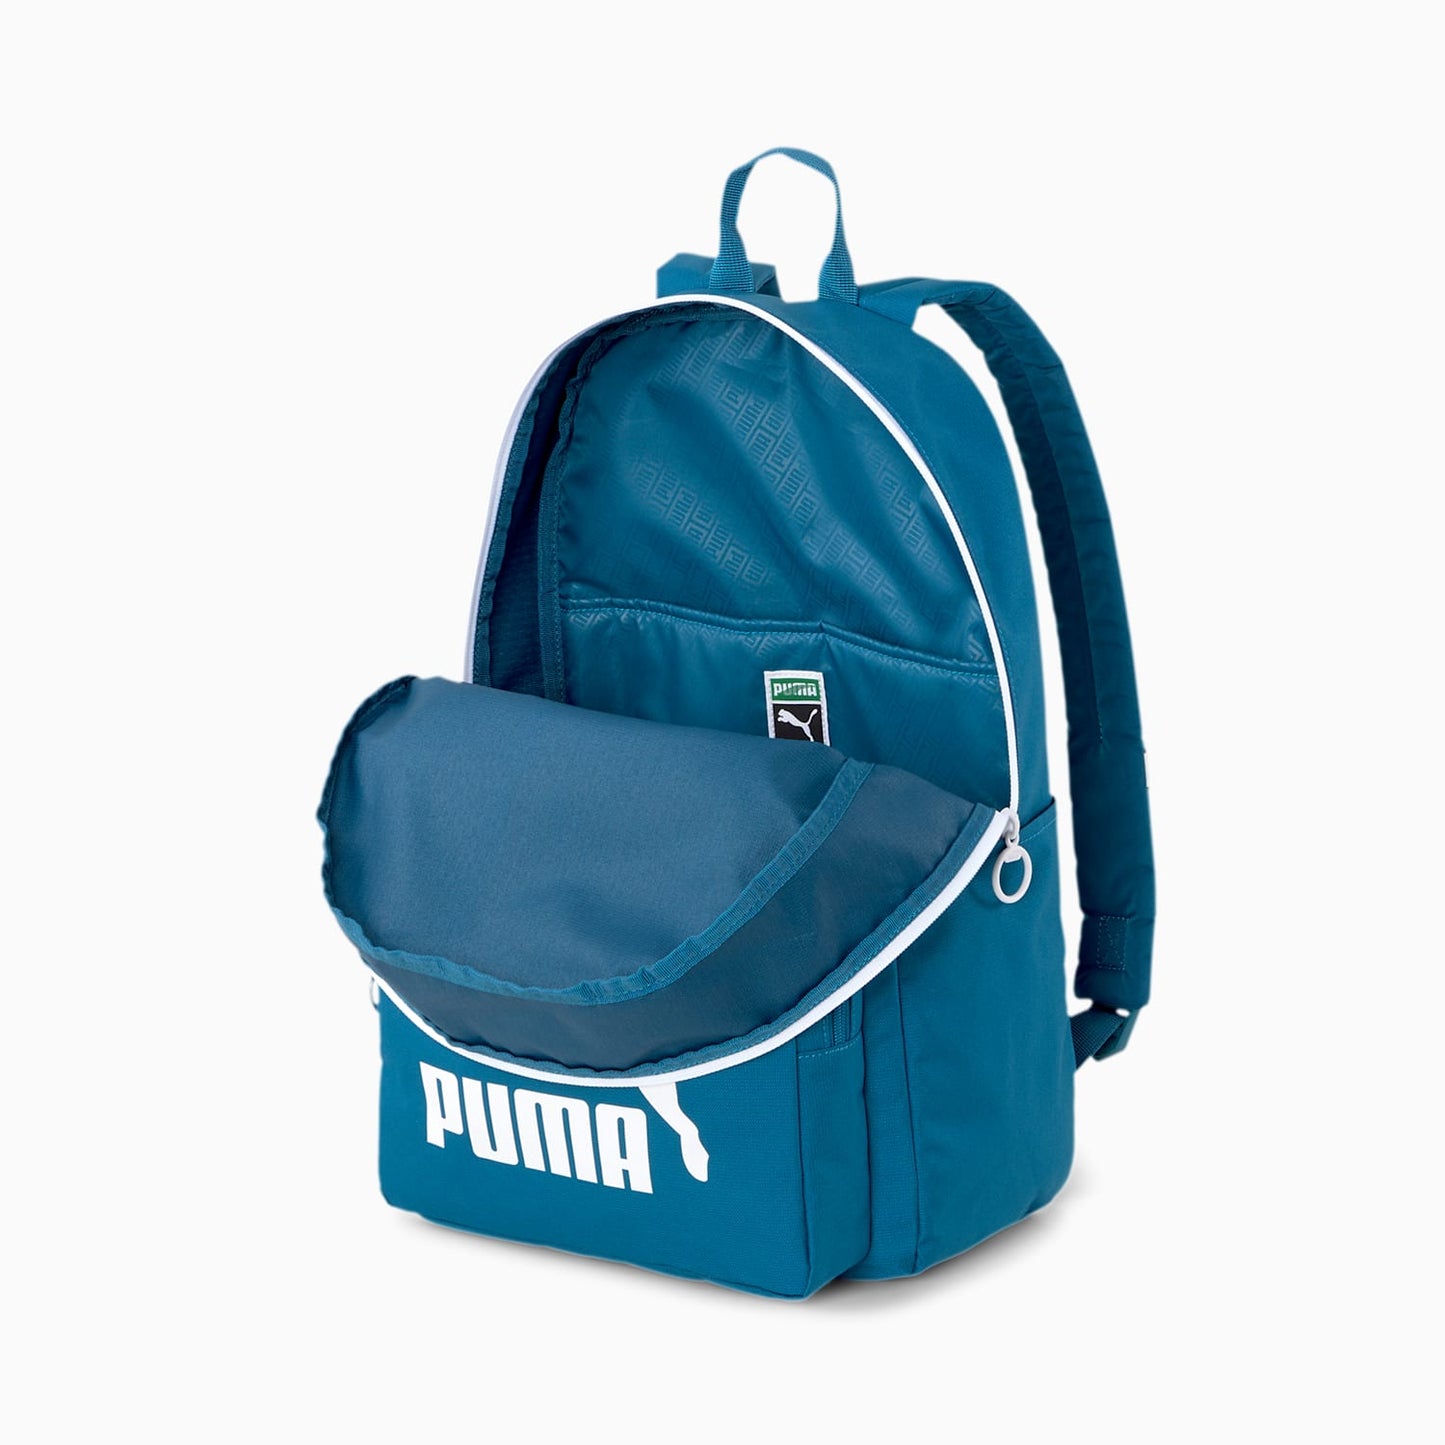 15" Laptop Backpack with Branding-077353 02